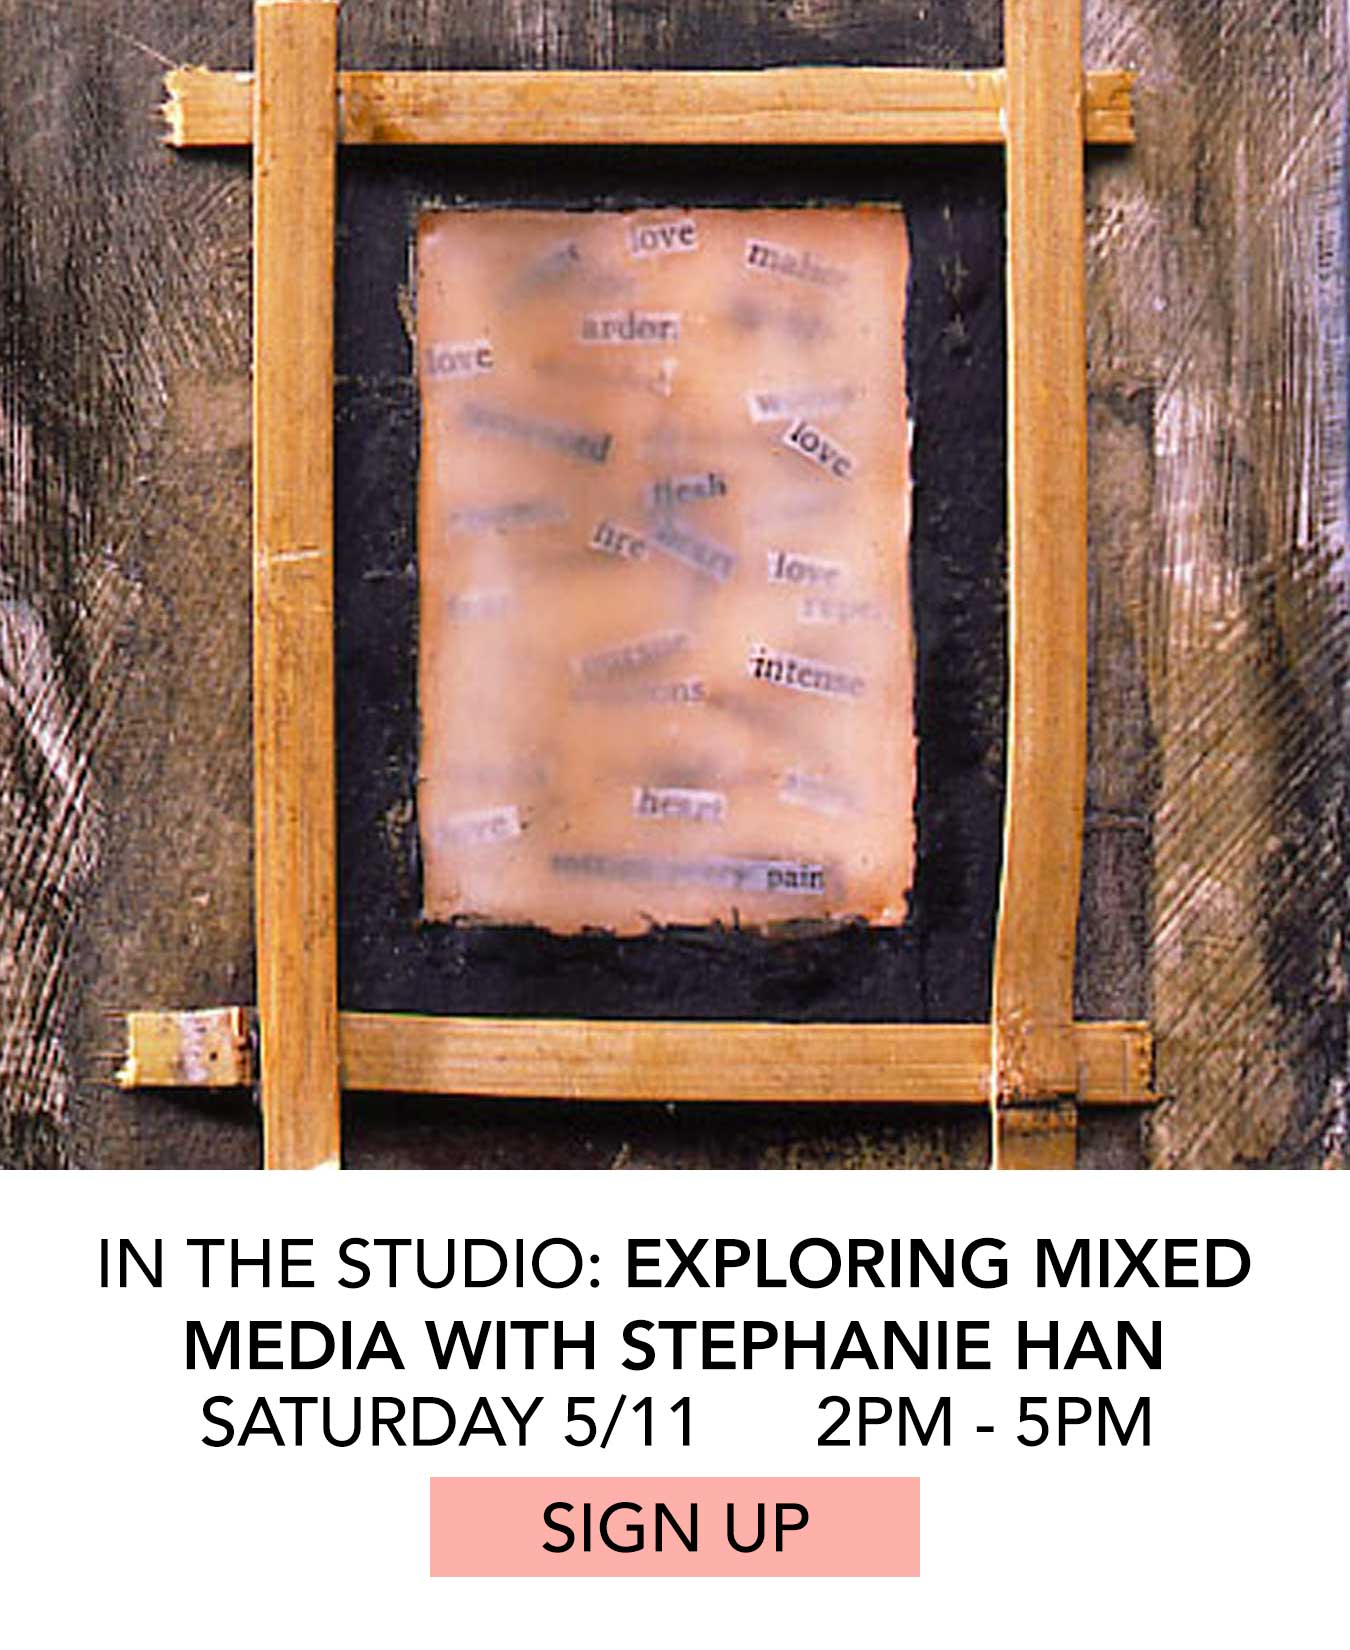 In the Studio: Exploring Mixed Media with Stephanie Han. Saturday 5/11 from 2:00pm to 5:00pm. Click to Sign Up.